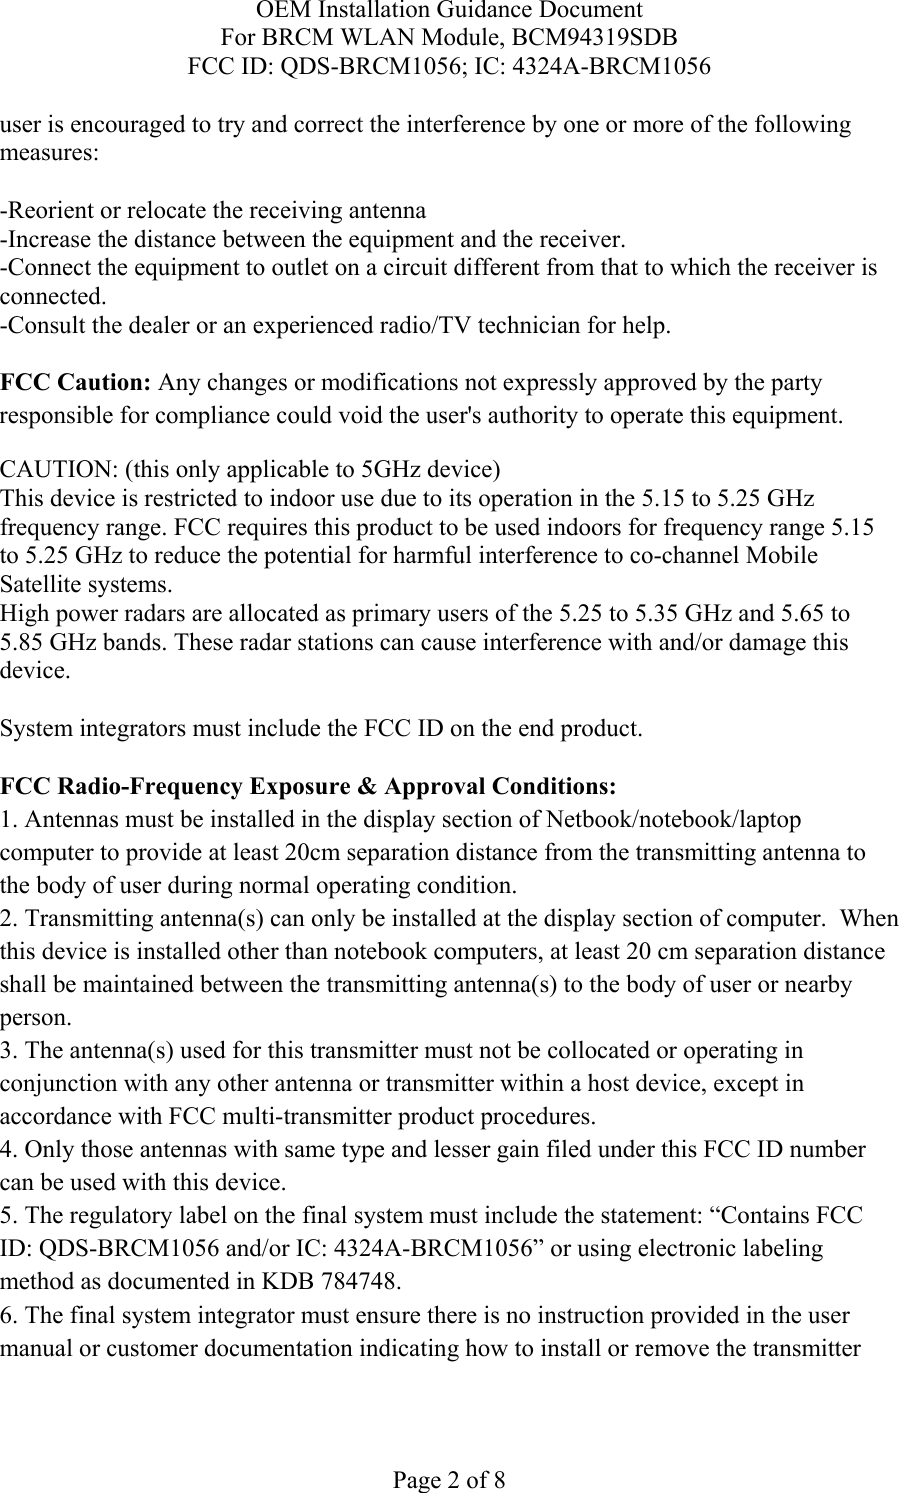 OEM Installation Guidance Document For BRCM WLAN Module, BCM94319SDB FCC ID: QDS-BRCM1056; IC: 4324A-BRCM1056  Page 2 of 8 user is encouraged to try and correct the interference by one or more of the following measures:   -Reorient or relocate the receiving antenna -Increase the distance between the equipment and the receiver. -Connect the equipment to outlet on a circuit different from that to which the receiver is connected. -Consult the dealer or an experienced radio/TV technician for help.  FCC Caution: Any changes or modifications not expressly approved by the party responsible for compliance could void the user&apos;s authority to operate this equipment. CAUTION: (this only applicable to 5GHz device) This device is restricted to indoor use due to its operation in the 5.15 to 5.25 GHz frequency range. FCC requires this product to be used indoors for frequency range 5.15 to 5.25 GHz to reduce the potential for harmful interference to co-channel Mobile Satellite systems. High power radars are allocated as primary users of the 5.25 to 5.35 GHz and 5.65 to 5.85 GHz bands. These radar stations can cause interference with and/or damage this device.  System integrators must include the FCC ID on the end product.   FCC Radio-Frequency Exposure &amp; Approval Conditions: 1. Antennas must be installed in the display section of Netbook/notebook/laptop computer to provide at least 20cm separation distance from the transmitting antenna to the body of user during normal operating condition. 2. Transmitting antenna(s) can only be installed at the display section of computer.  When this device is installed other than notebook computers, at least 20 cm separation distance shall be maintained between the transmitting antenna(s) to the body of user or nearby person. 3. The antenna(s) used for this transmitter must not be collocated or operating in conjunction with any other antenna or transmitter within a host device, except in accordance with FCC multi-transmitter product procedures. 4. Only those antennas with same type and lesser gain filed under this FCC ID number can be used with this device. 5. The regulatory label on the final system must include the statement: “Contains FCC ID: QDS-BRCM1056 and/or IC: 4324A-BRCM1056” or using electronic labeling method as documented in KDB 784748. 6. The final system integrator must ensure there is no instruction provided in the user manual or customer documentation indicating how to install or remove the transmitter 